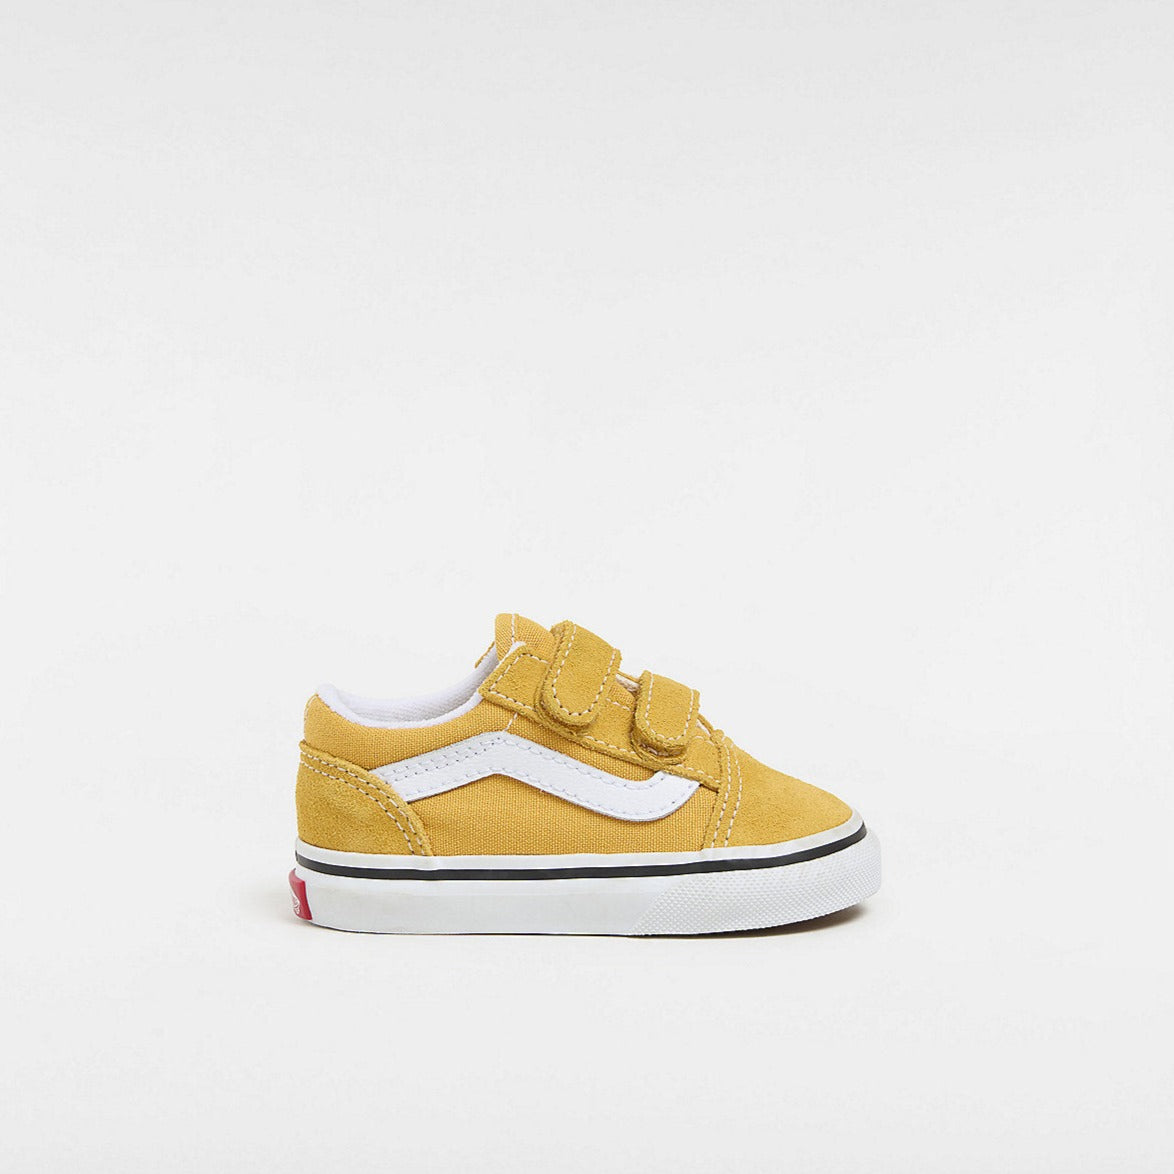 Vans παιδικά sneakers για αγόρι/κορίτσι VN000CRWLSV1 Old Skool V Color Theory Golden Glow